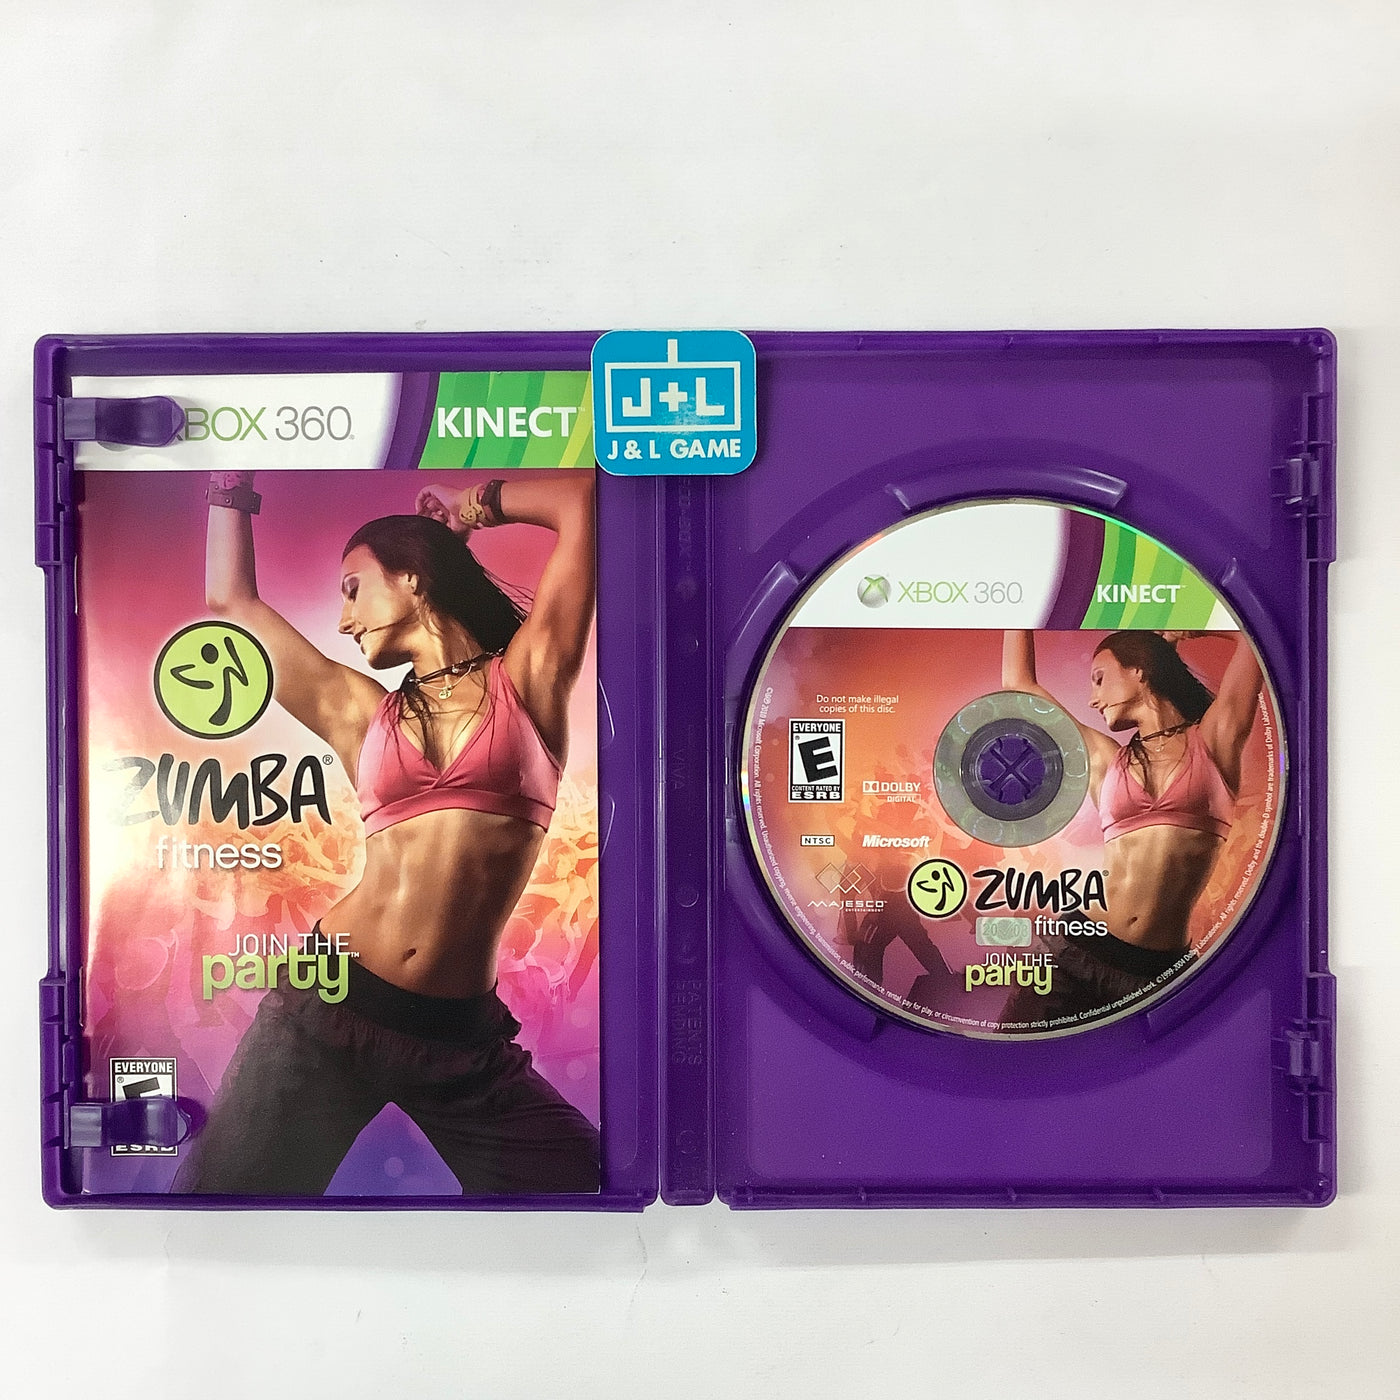 Zumba Fitness Core - Nintendo Wii [Pre-Owned]